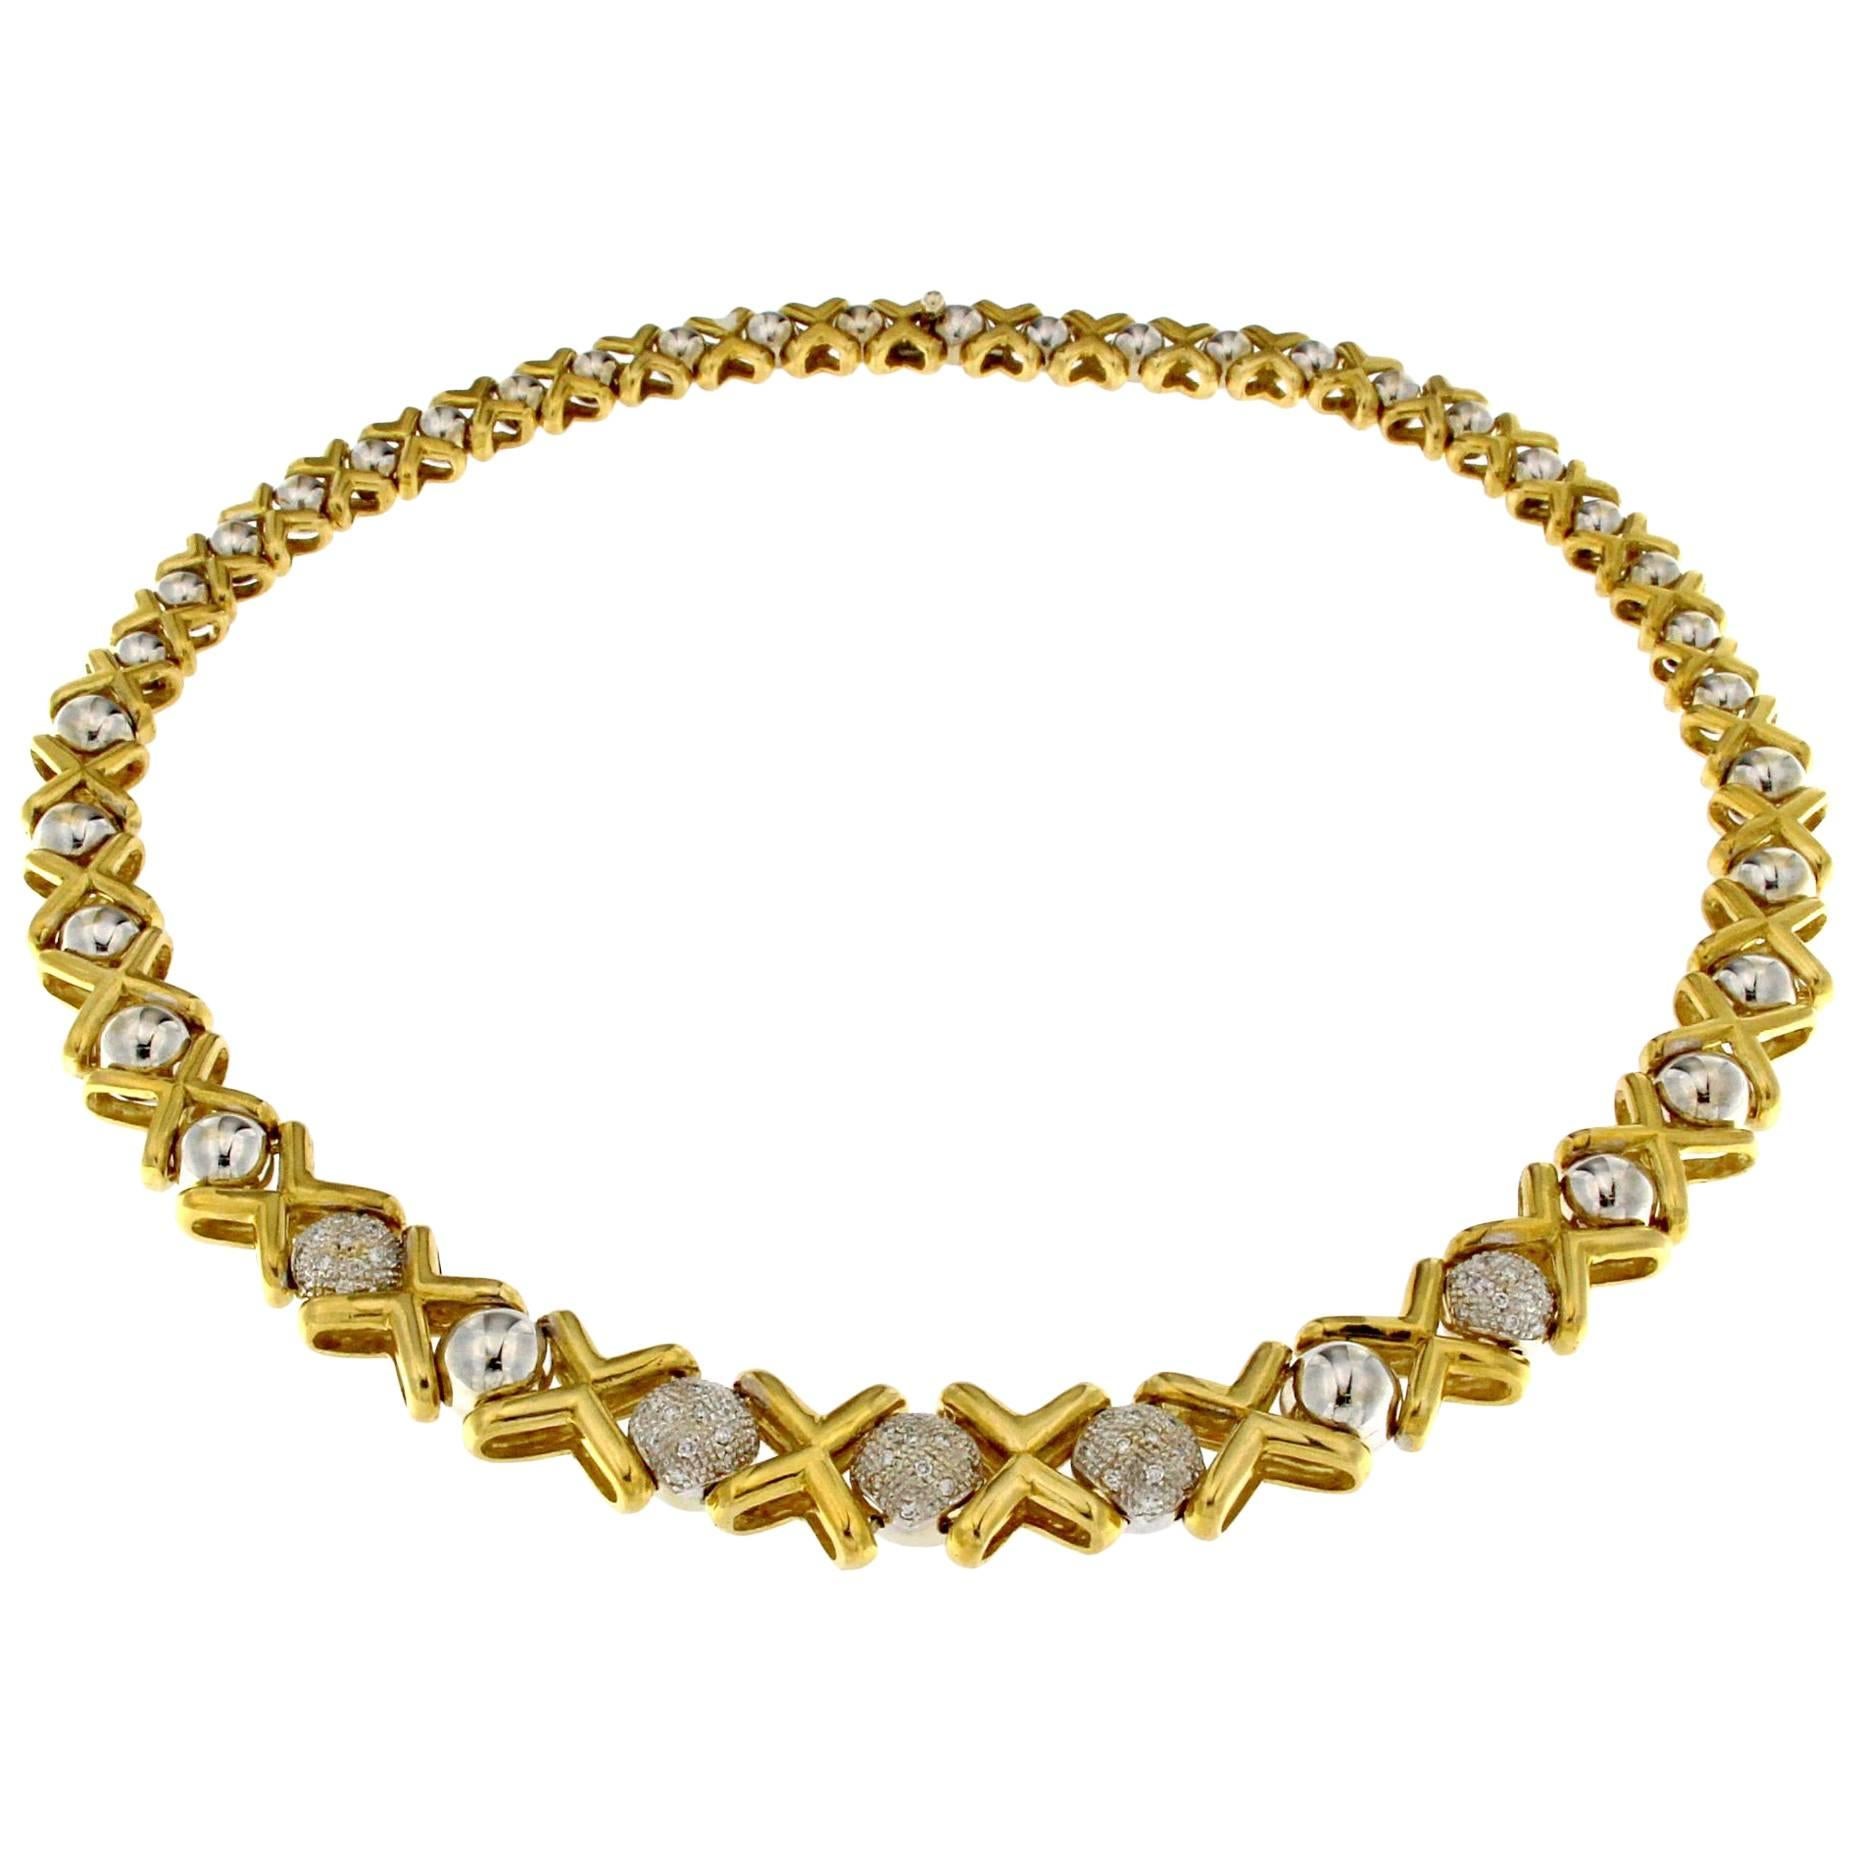 18 Karat Gold Degradè Necklace in Two Colors and White Diamonds